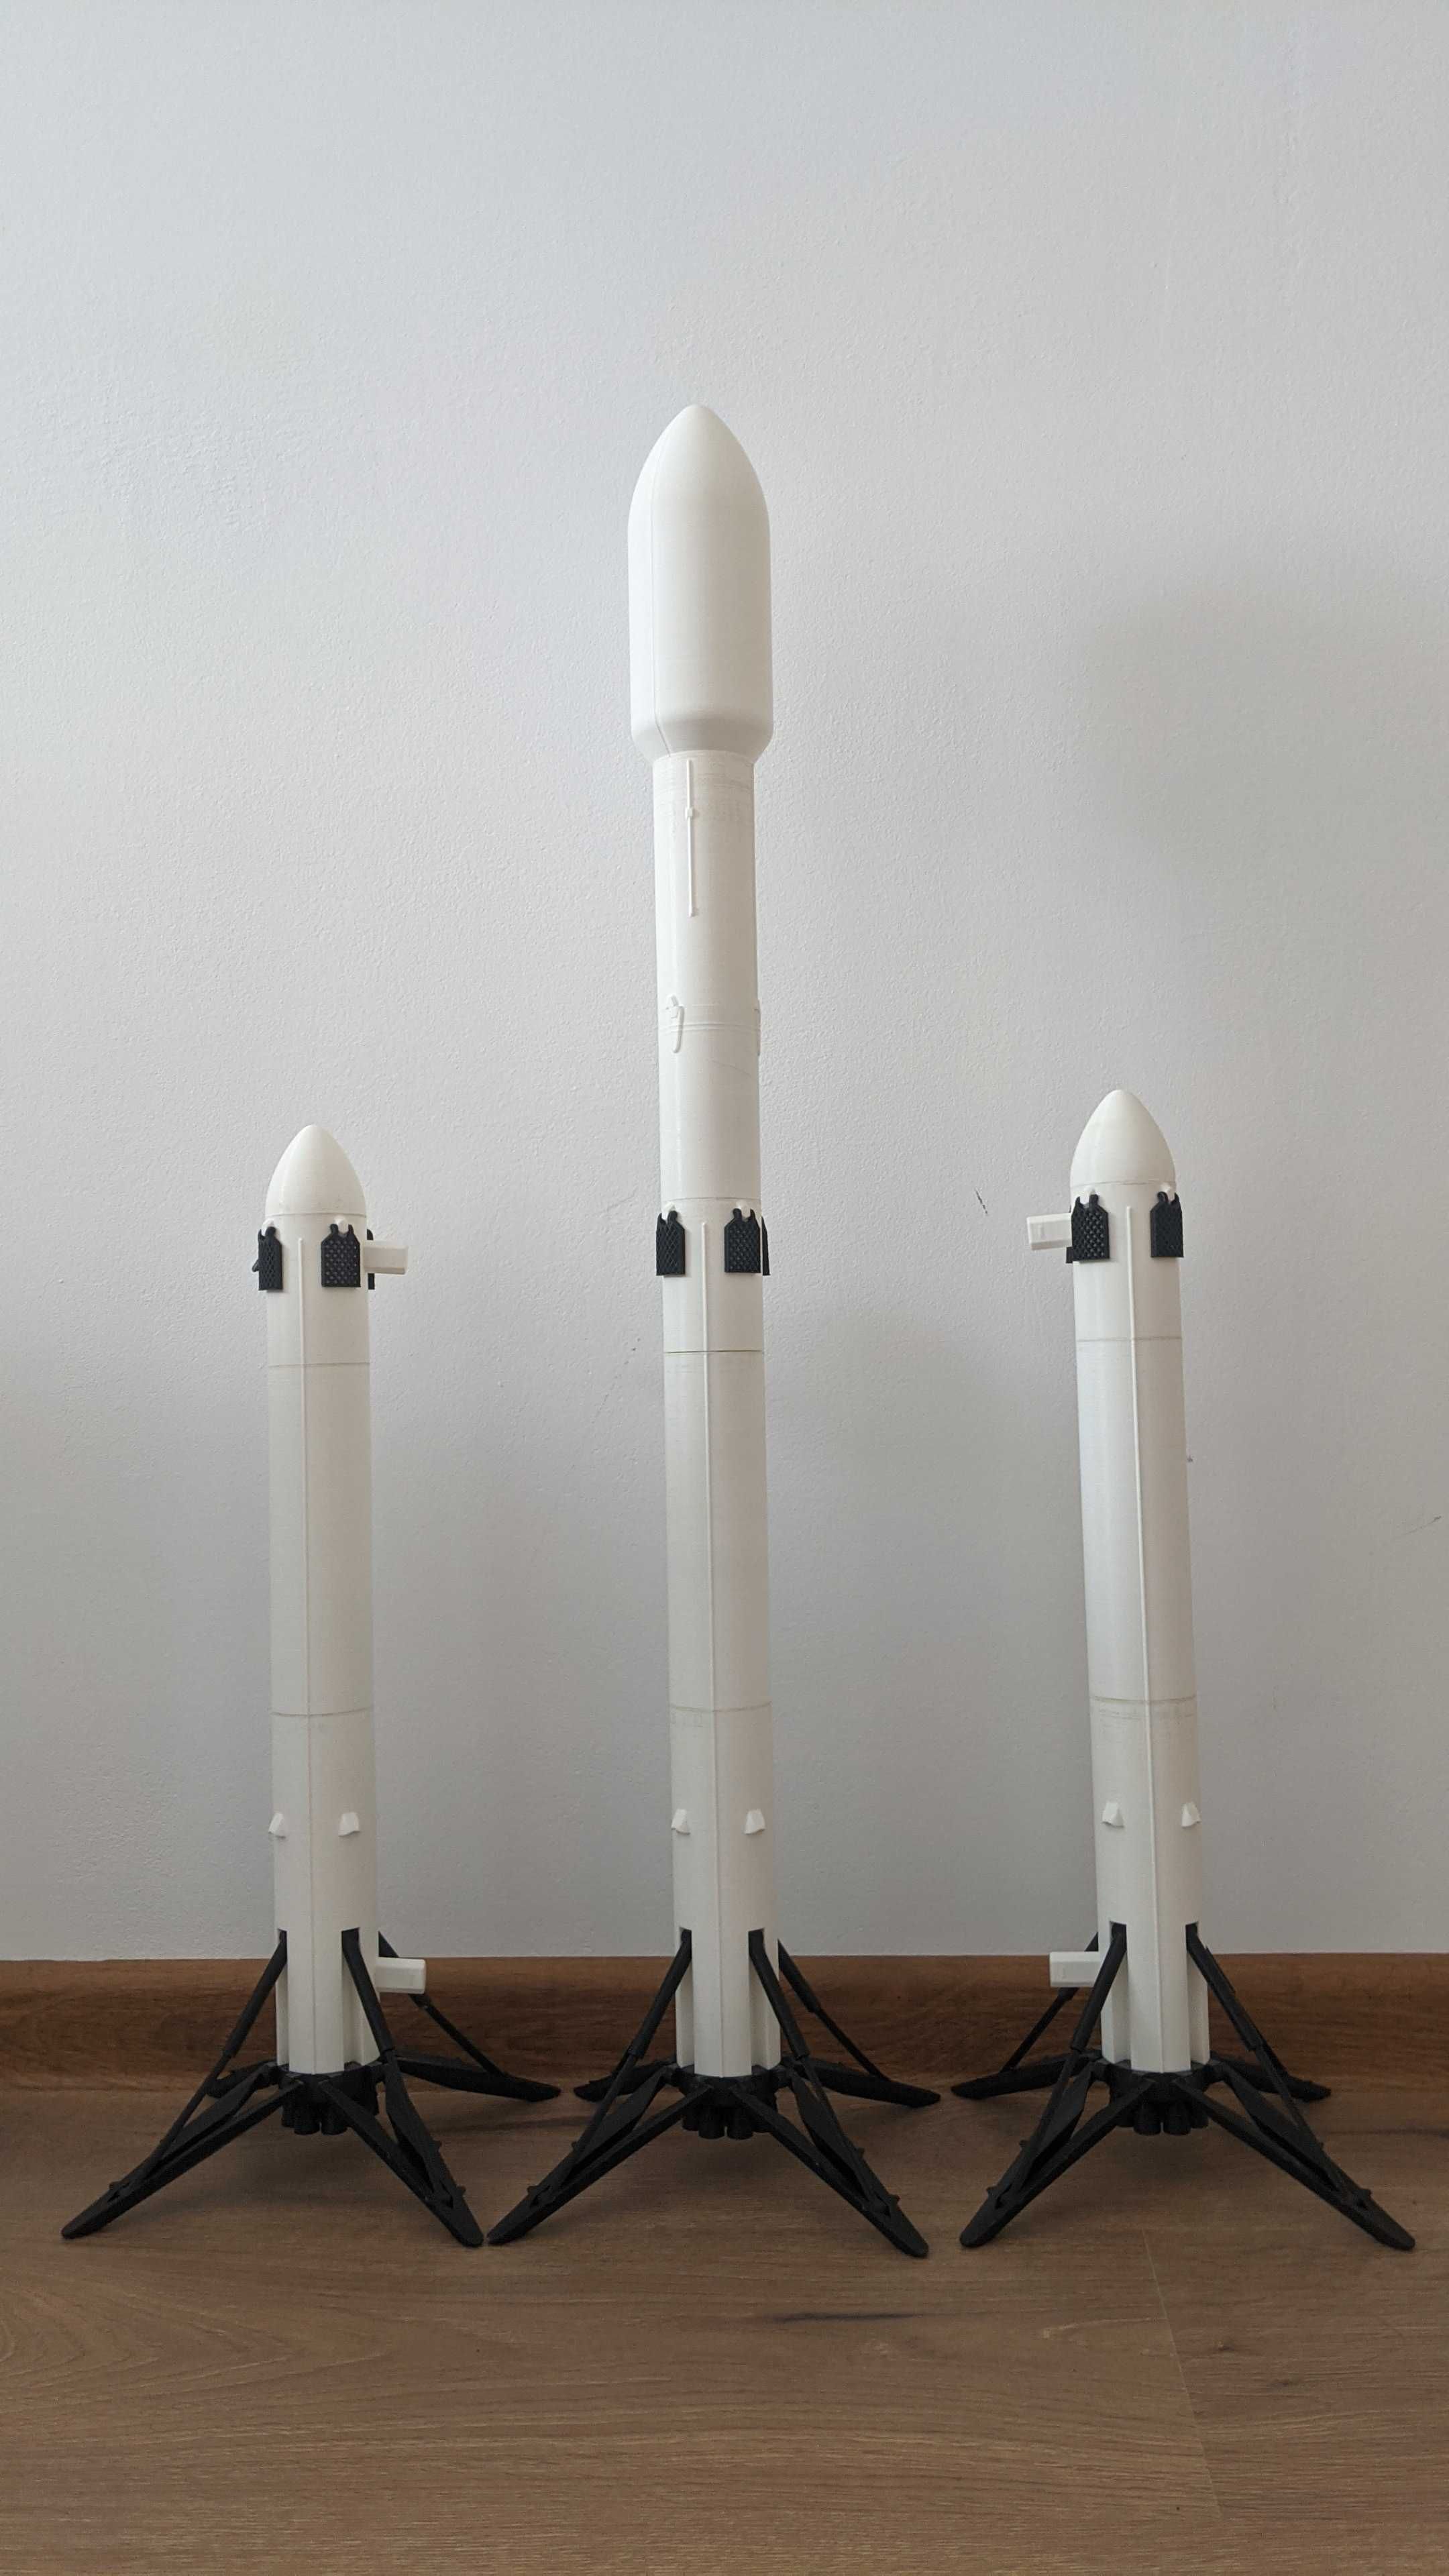 3D Printed SpaceX Falcon Heavy Scale Model